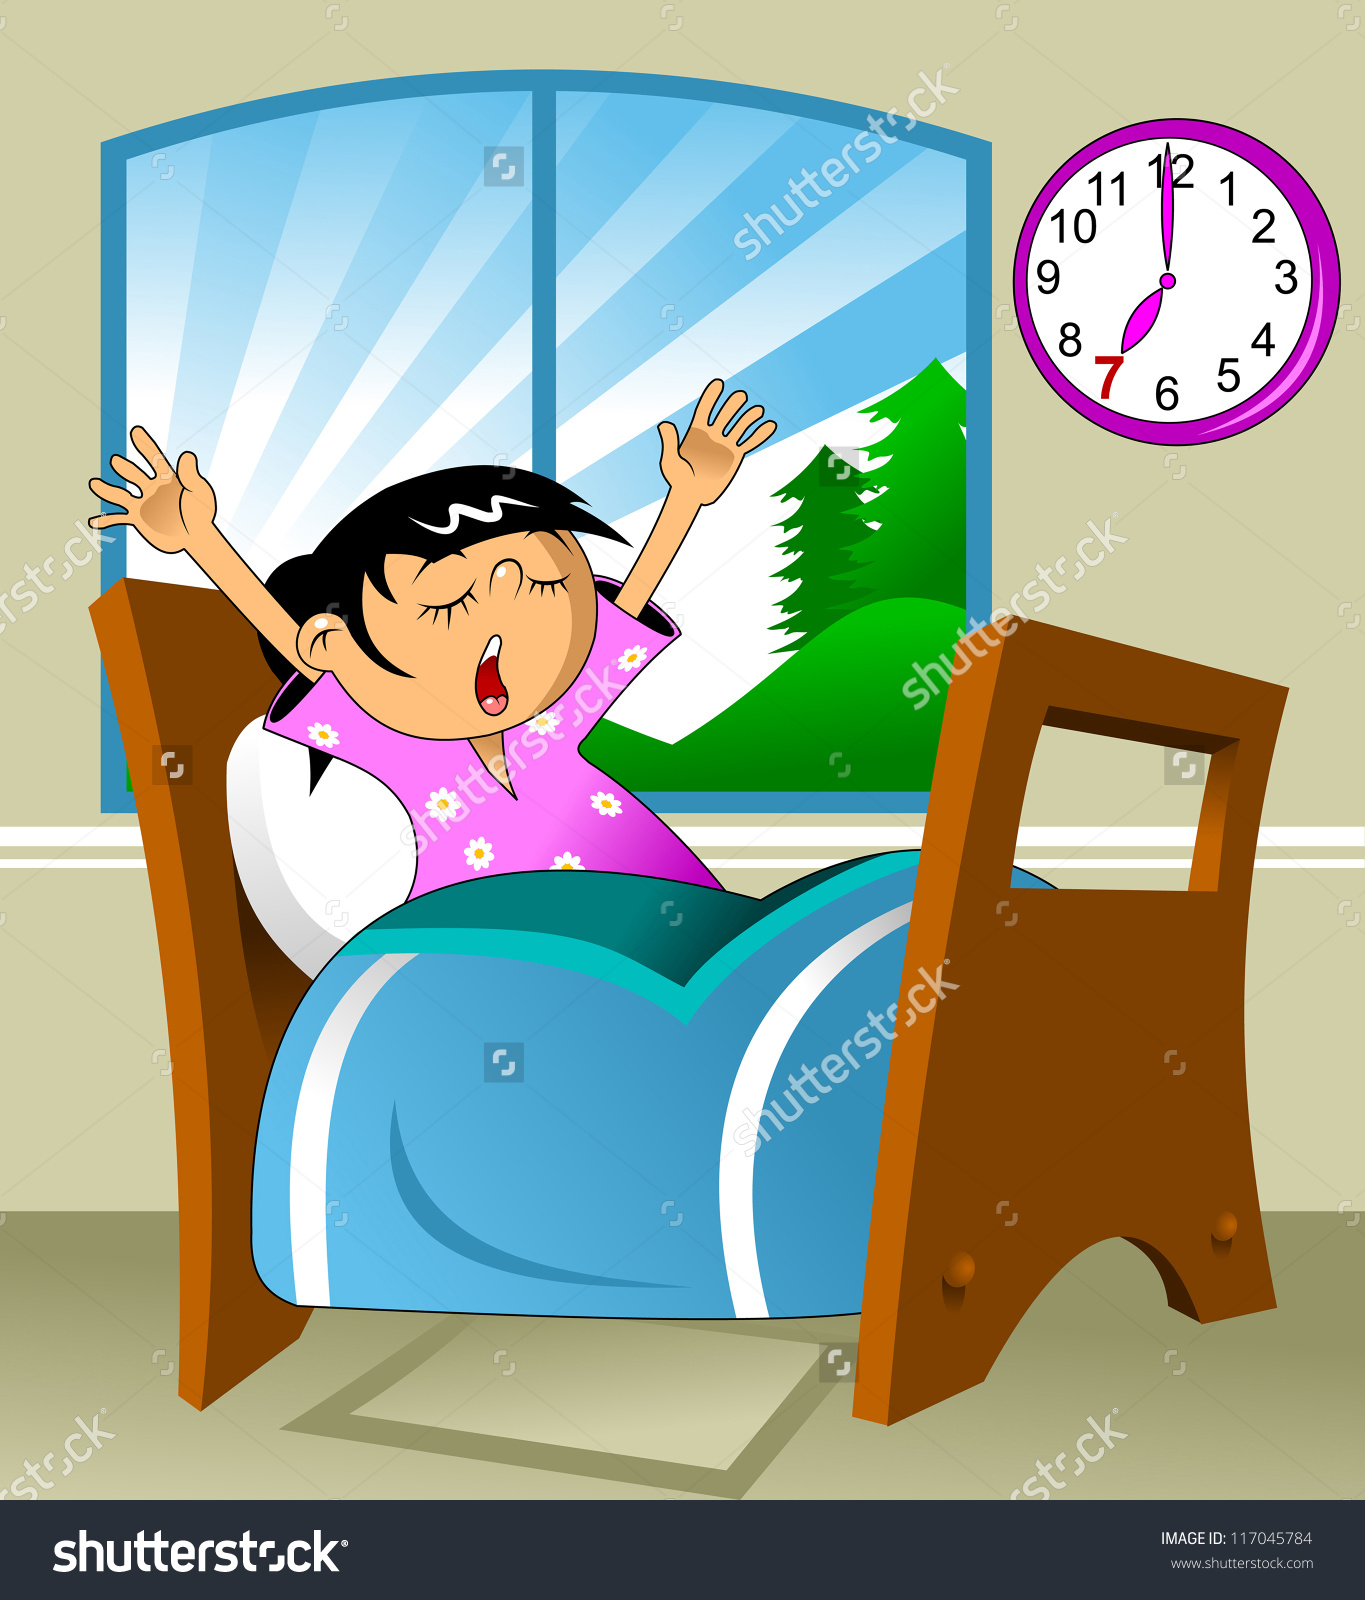 Just woke up clipart.